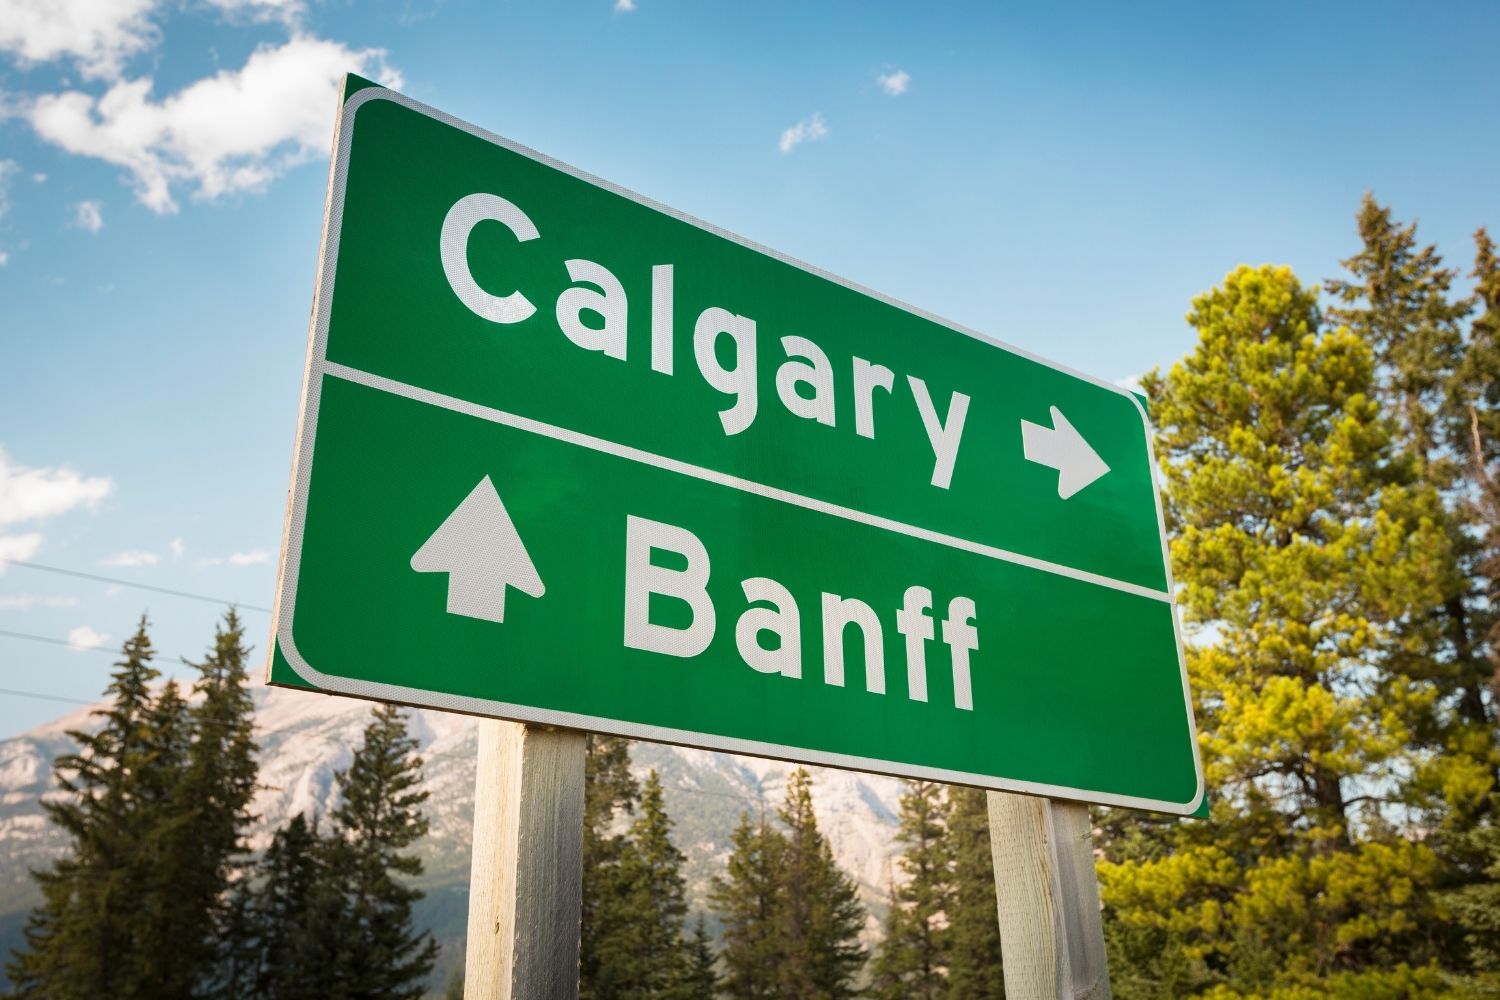 how to get from calgary to banff